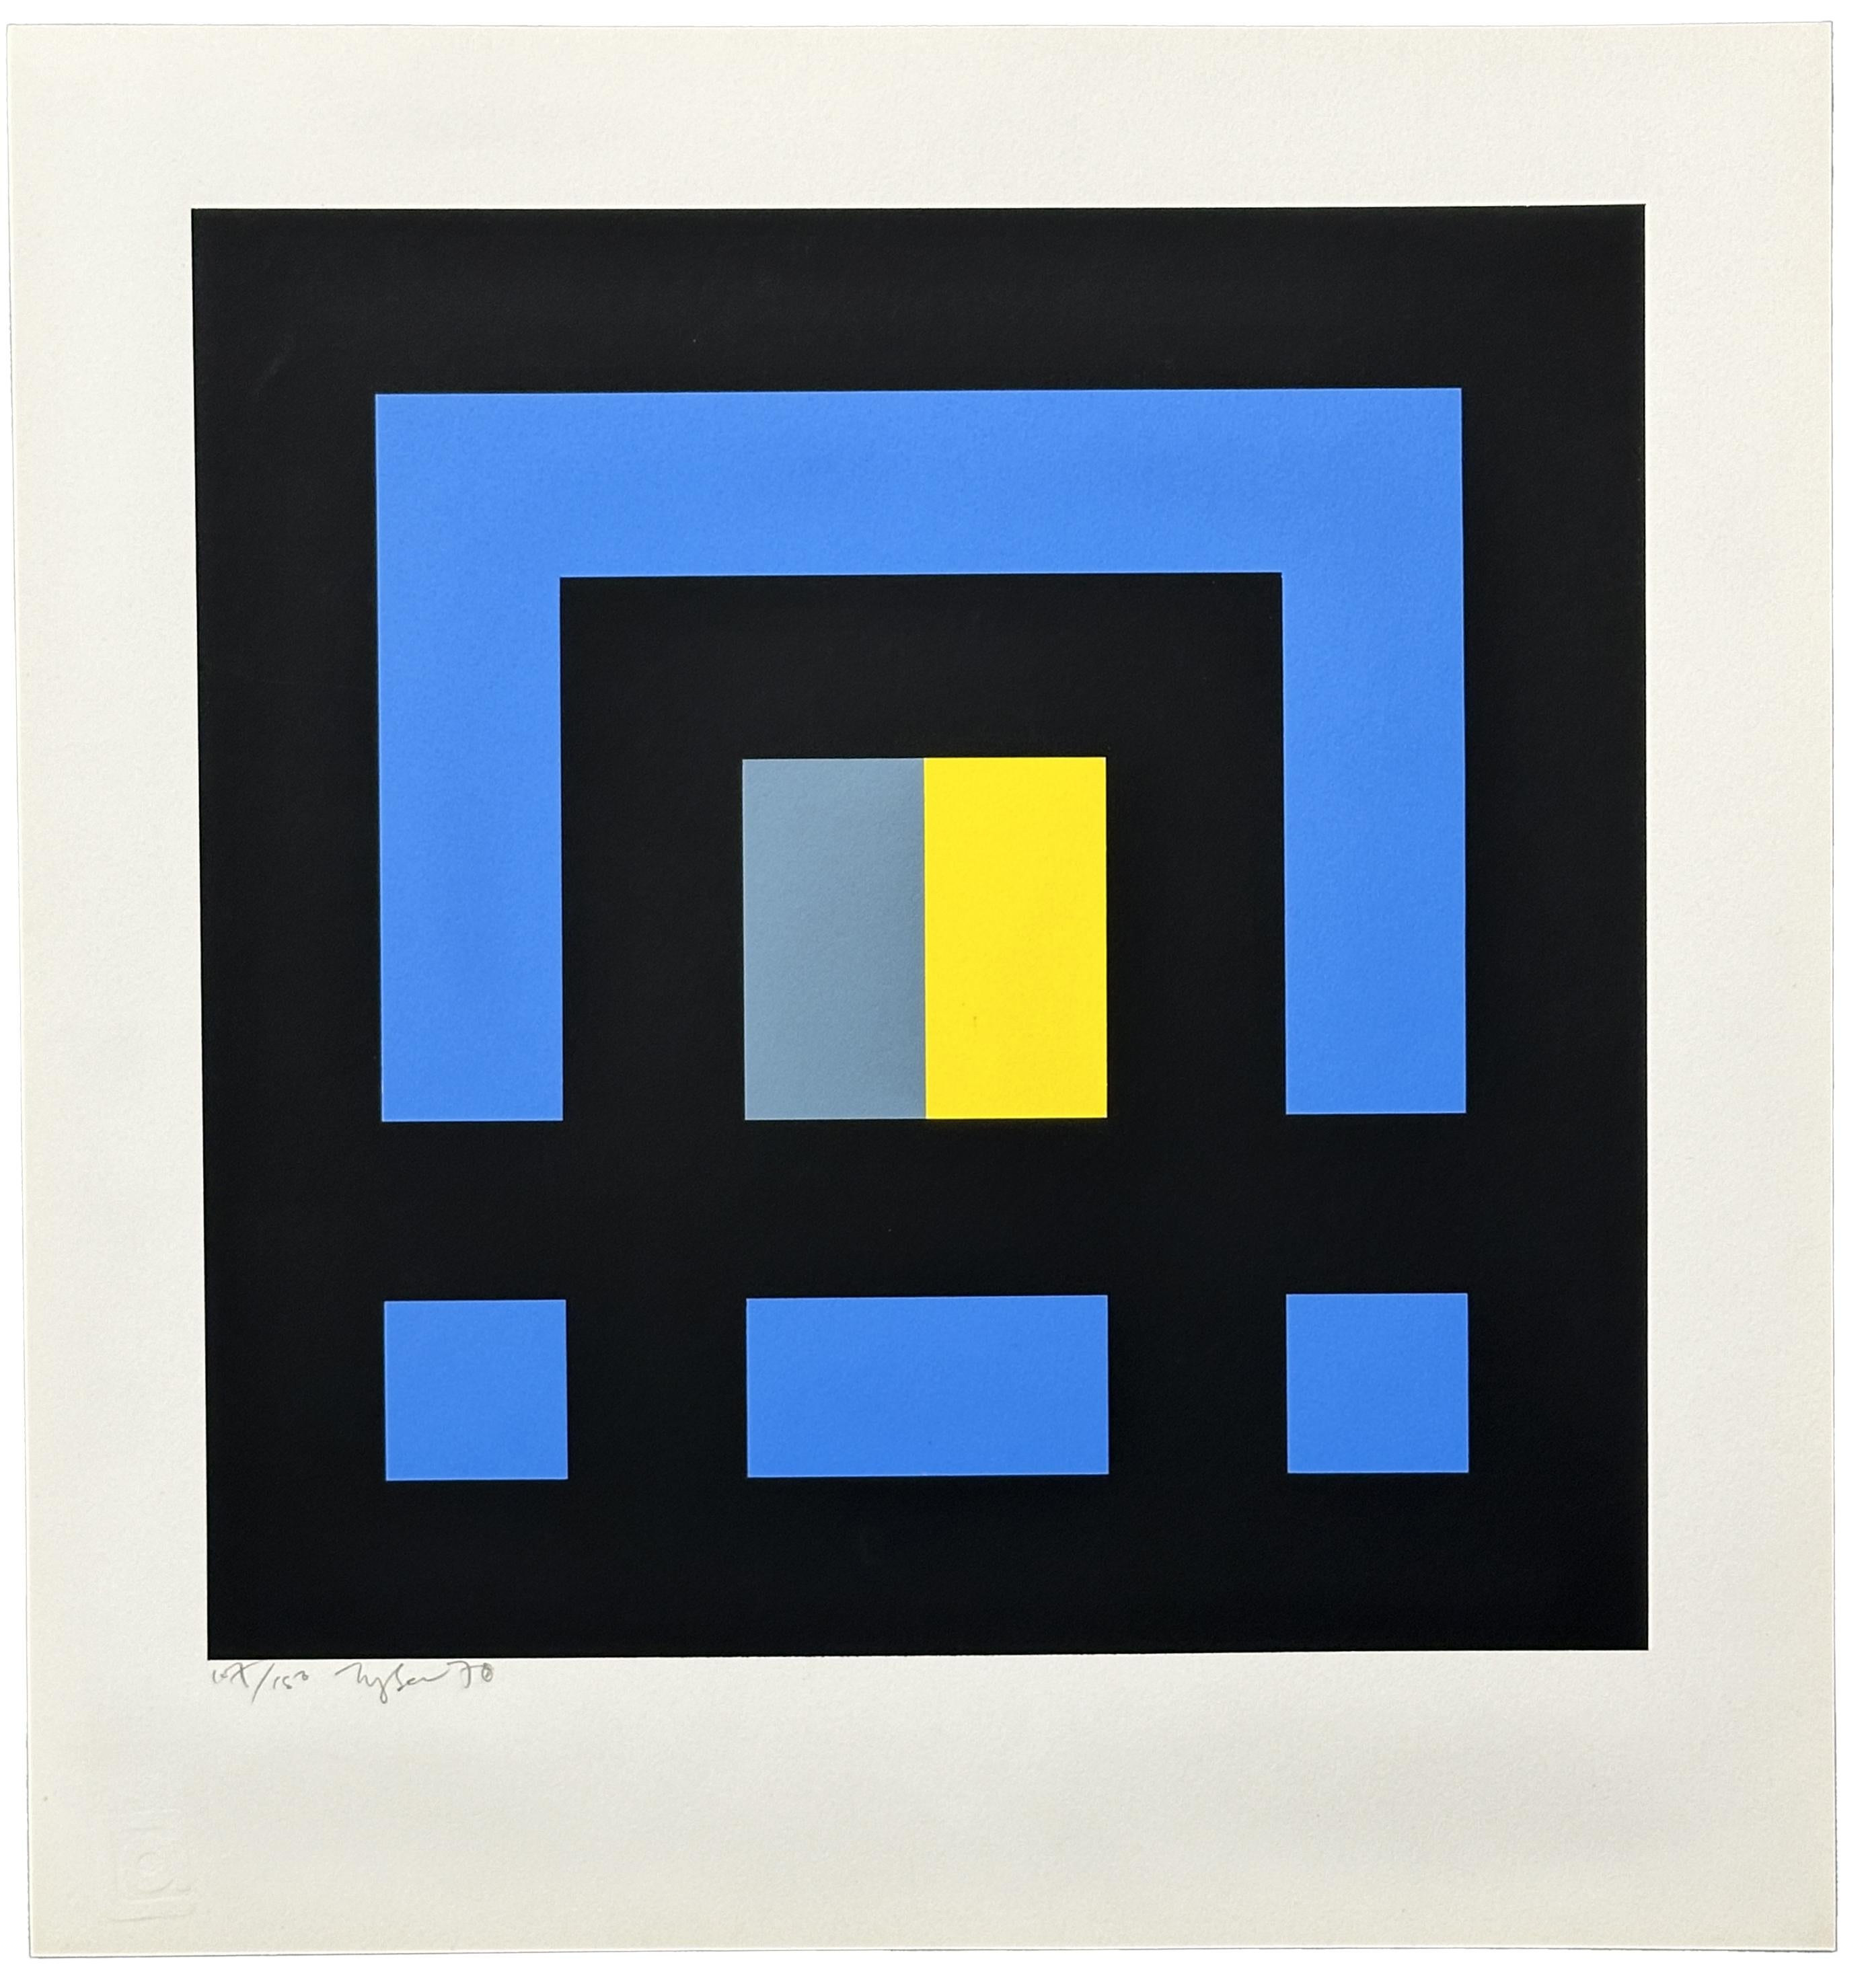 Ian Tyson Abstract Print - Diversions 1970 Signed Limited Edition Screen Print